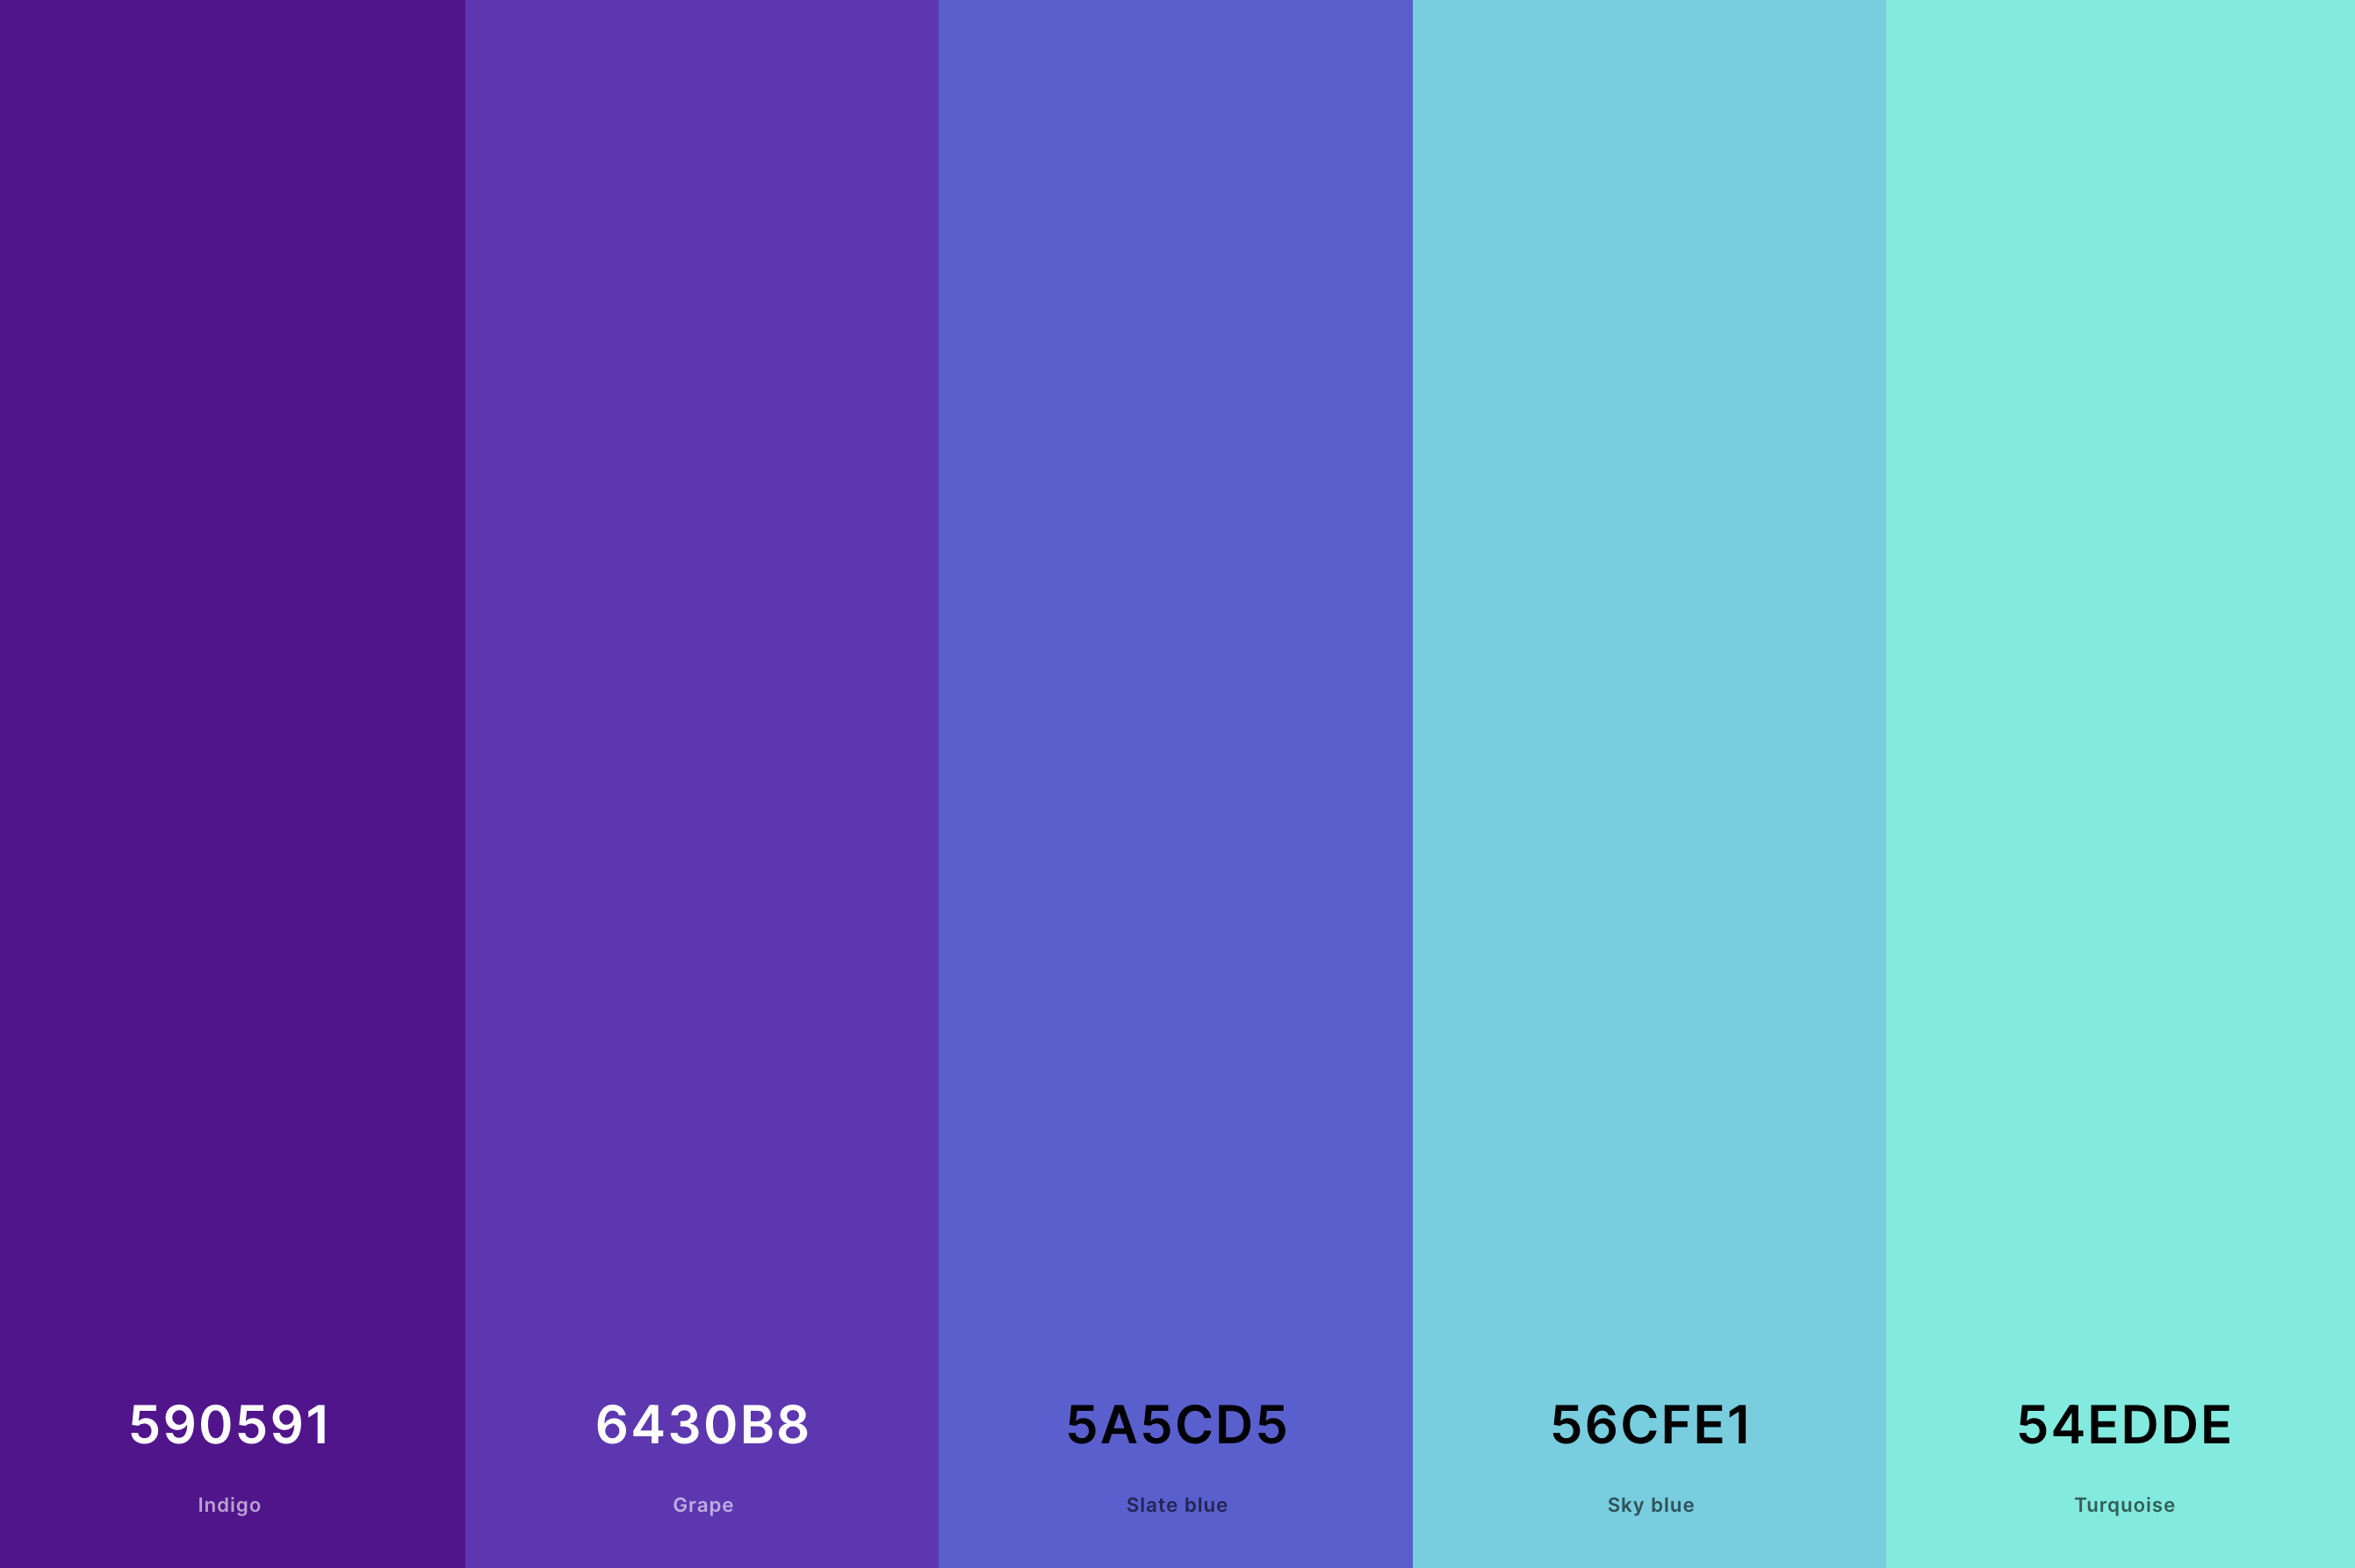 5. Purple And Turquoise Color Palette Color Palette with Indigo (Hex #590591) + Grape (Hex #6430B8) + Slate Blue (Hex #5A5CD5) + Sky Blue (Hex #56CFE1) + Turquoise (Hex #54EDDE) Color Palette with Hex Codes